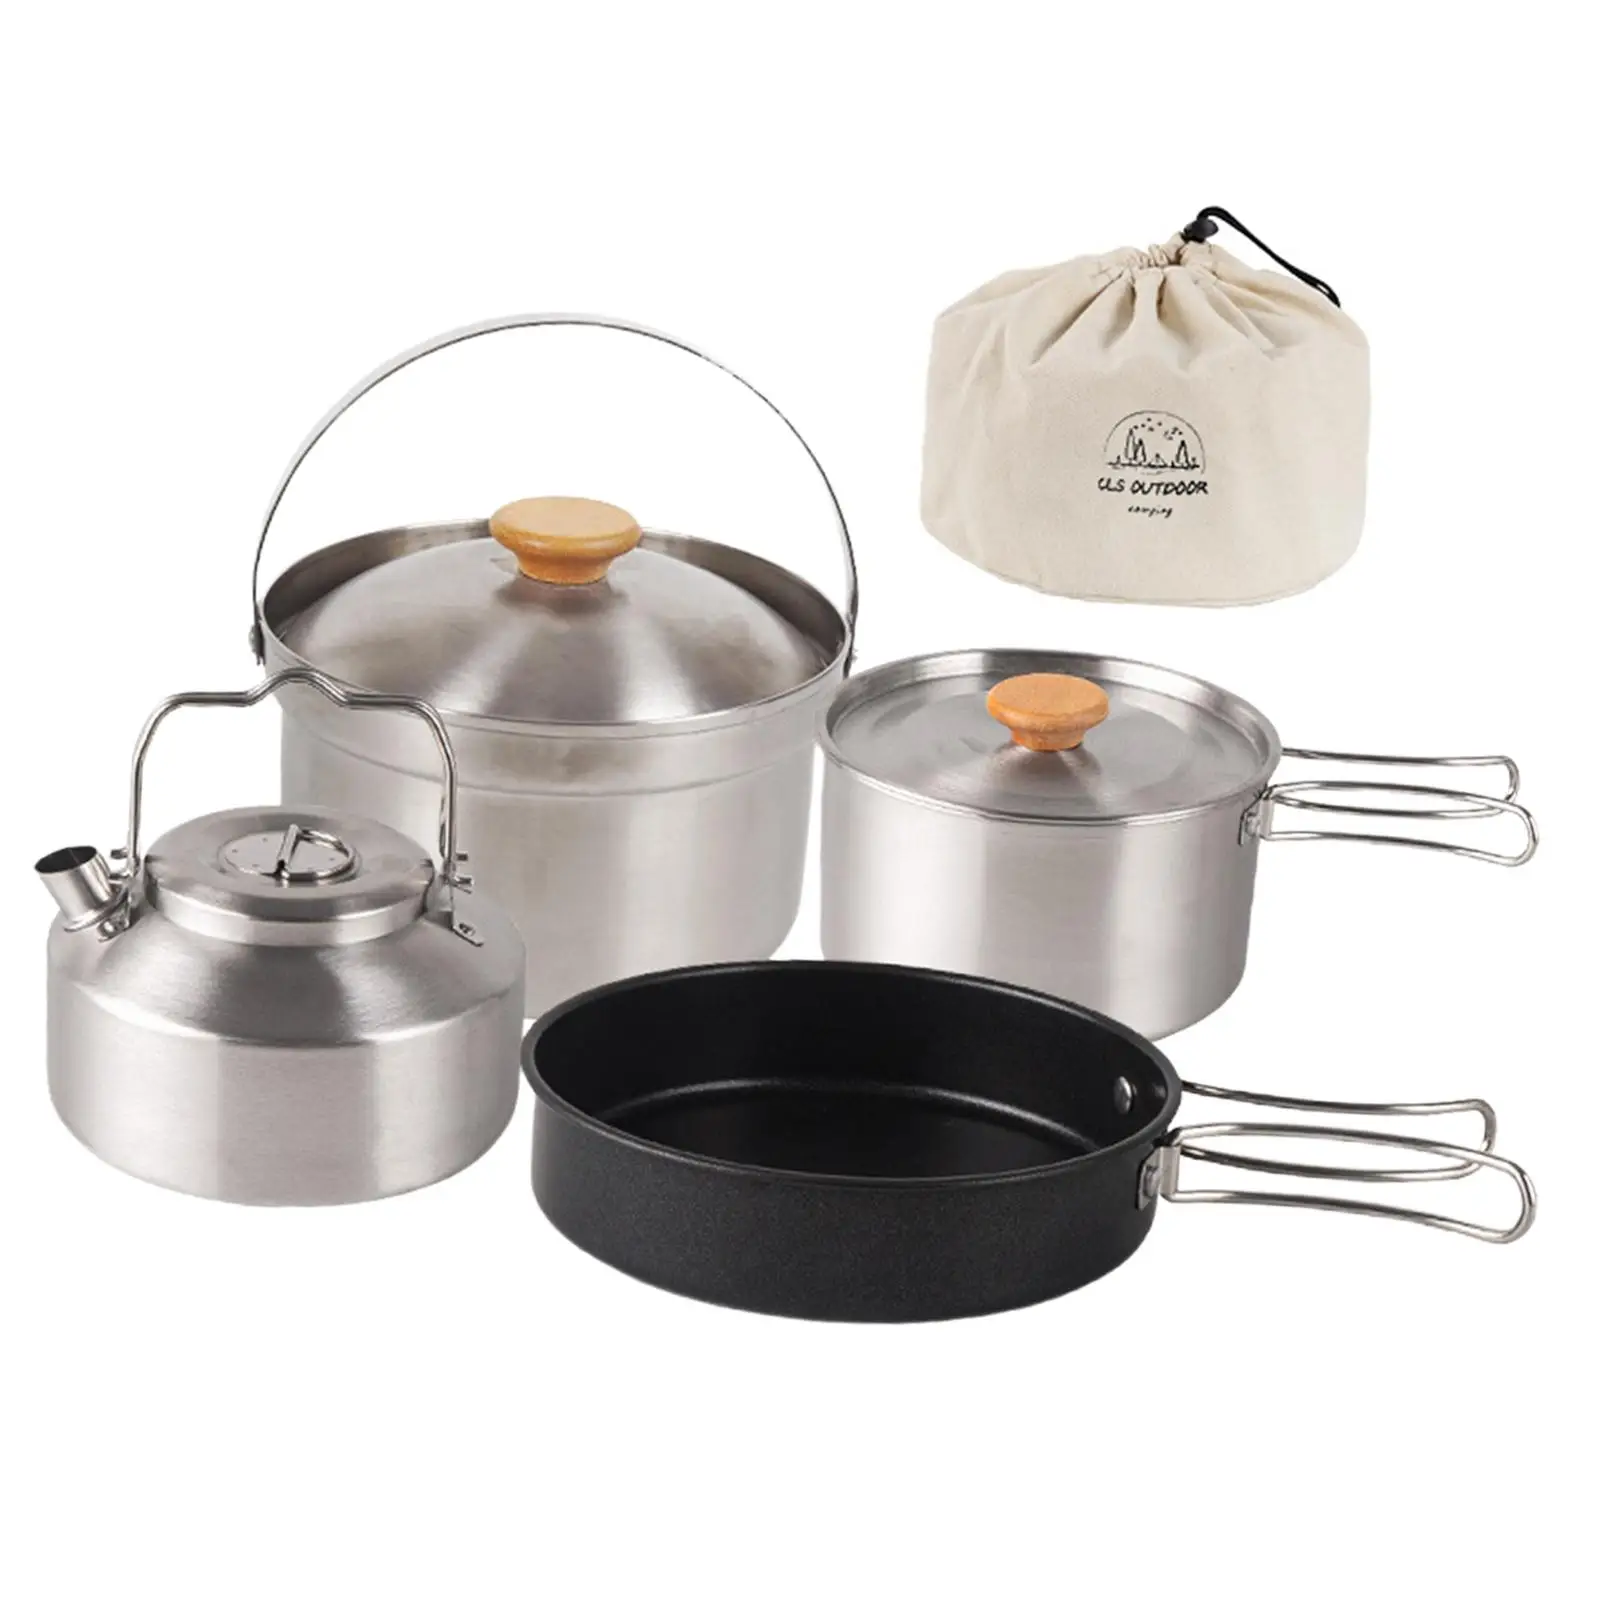 Fry Pan Kettle Stockpot Camping Cookware Set for Backpacking Picnic BBQ